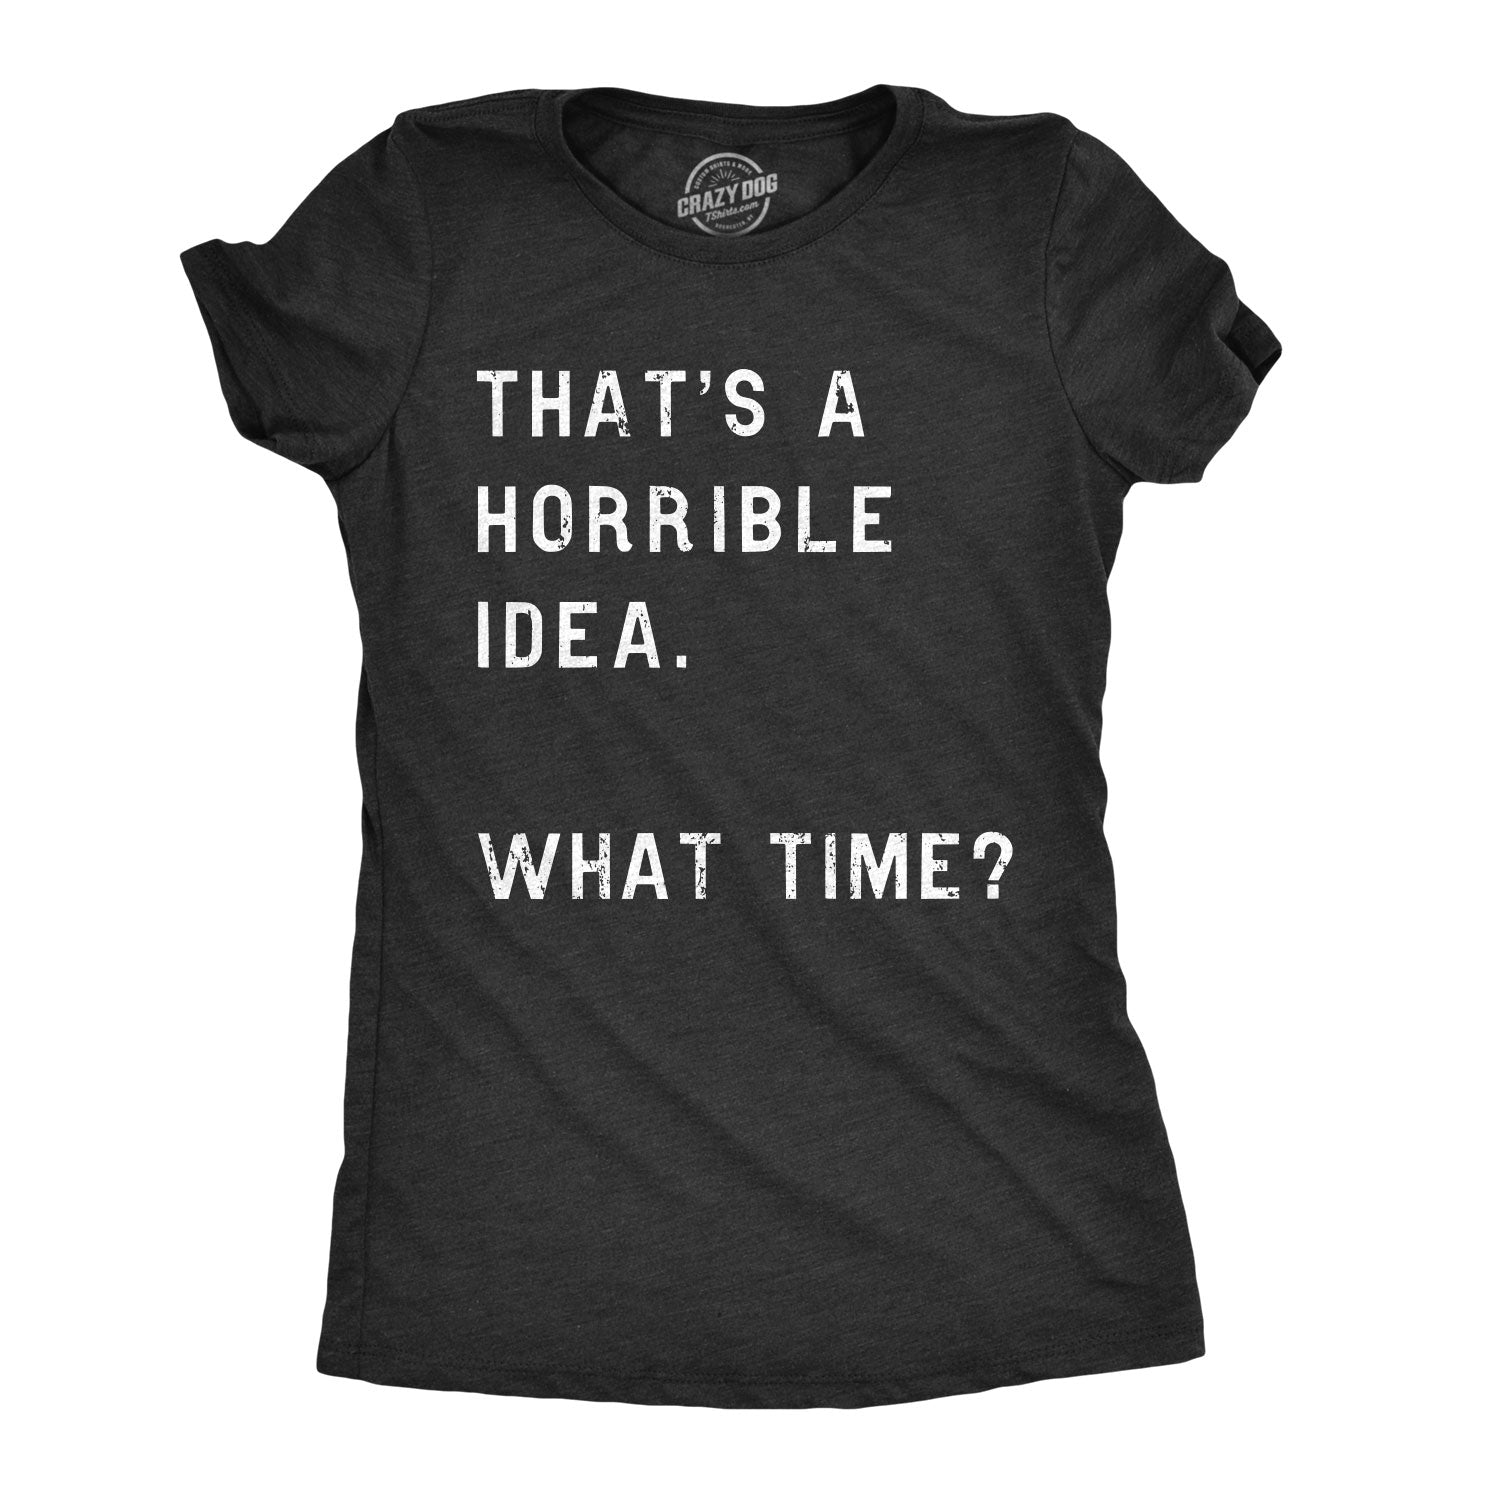 Funny Heather Black That Sounds Like A Horrible Idea. What Time? Womens T Shirt Nerdy Sarcastic Tee